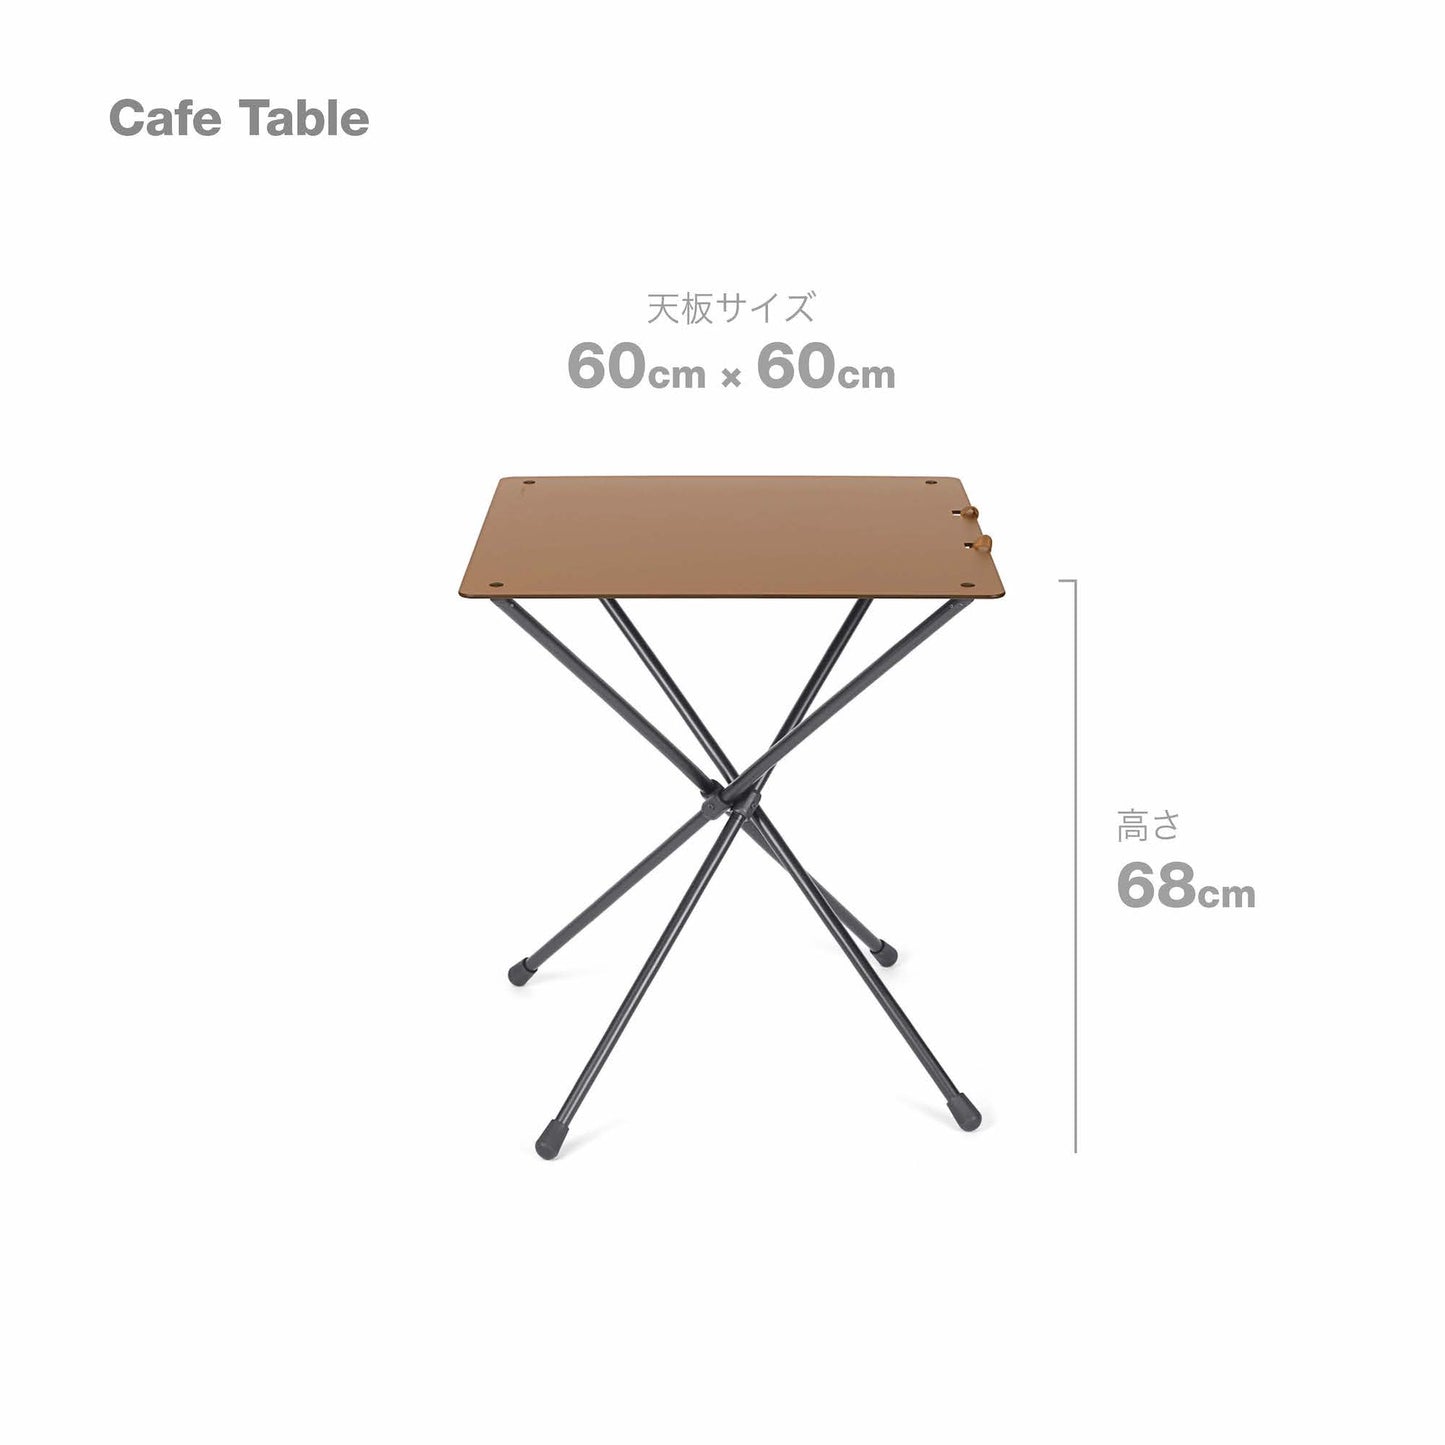 Cafe Table - Coyote Tan